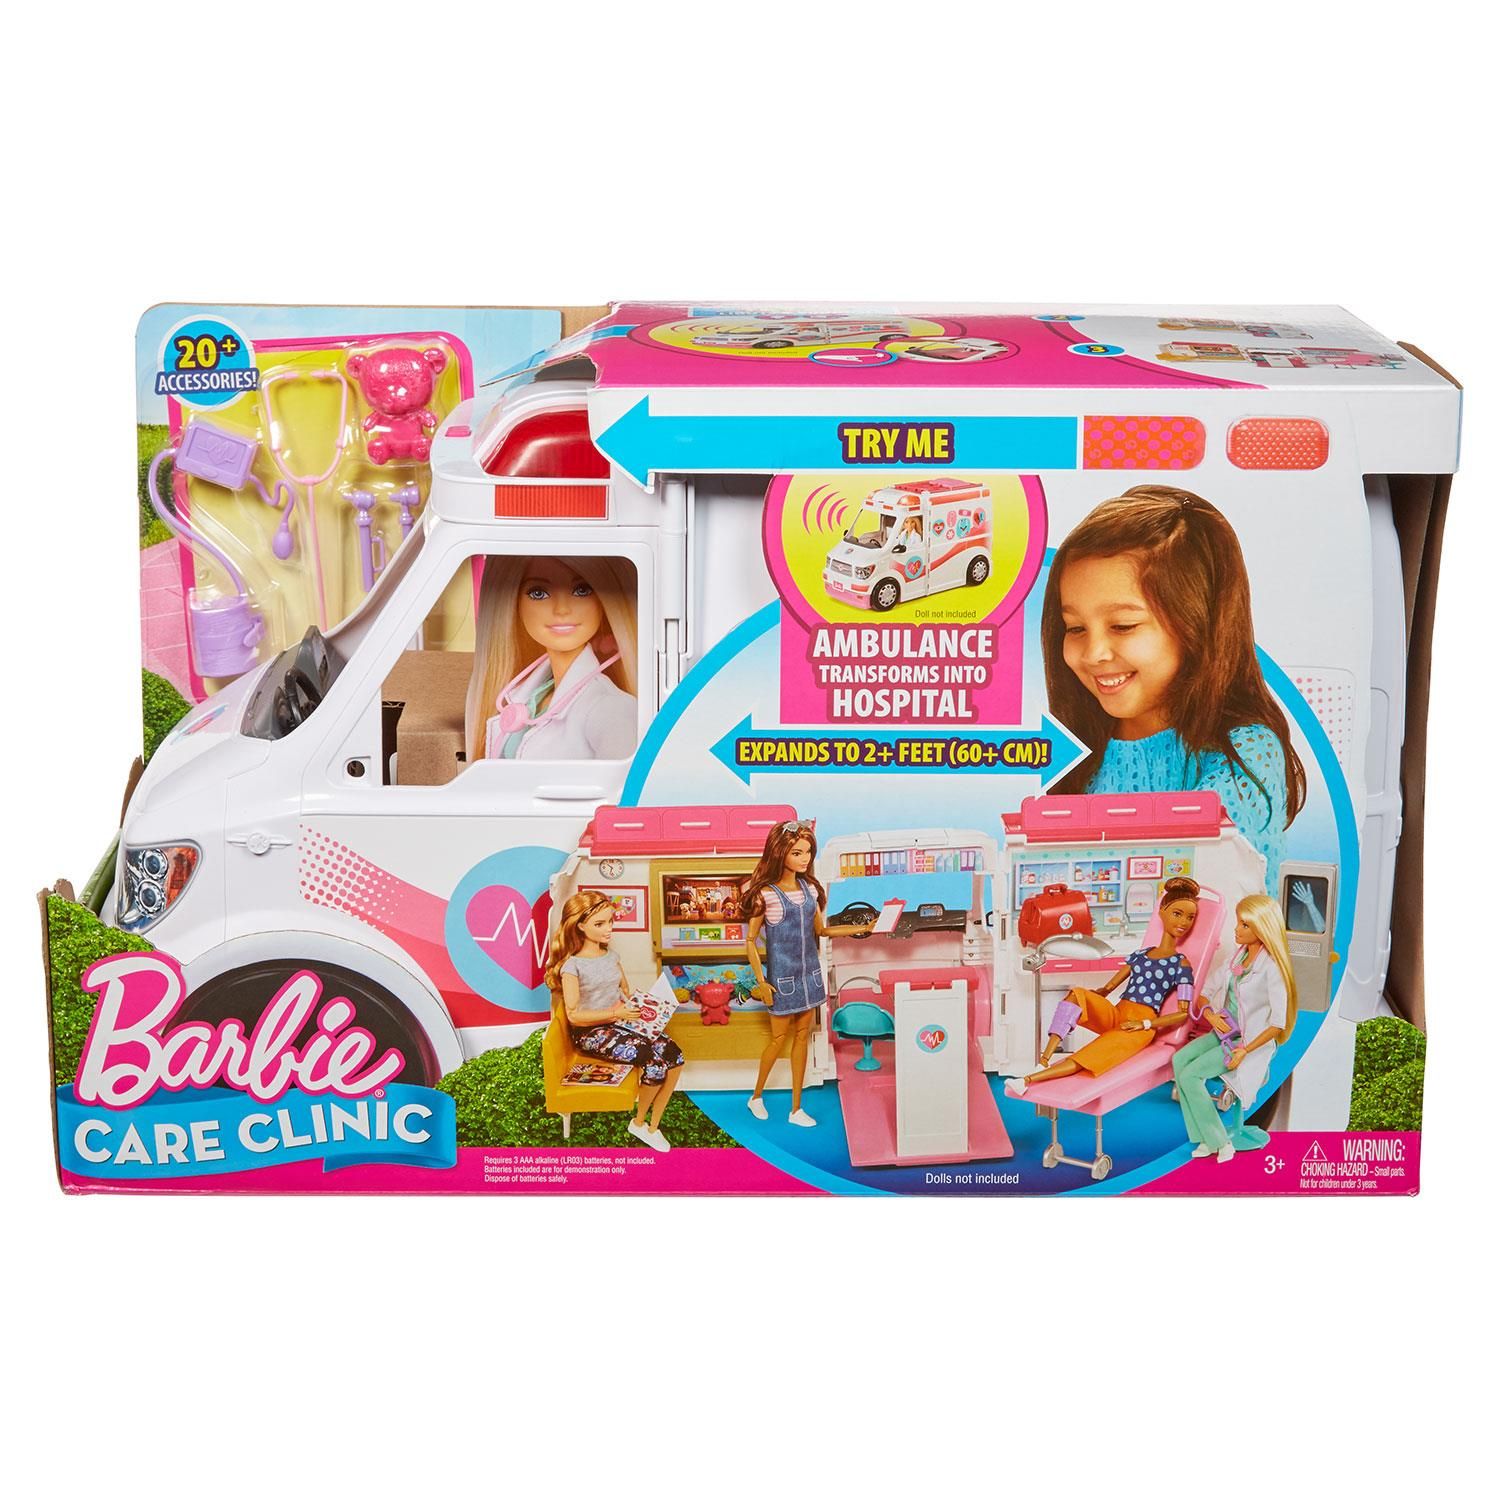 Barbie Career Care Clinic Ambulance with Accessories, Great Gift for Kids

Drive playtime fun with the Barbie care clinic. This 2-in-1 rescue vehicle is both an ambulance, with working siren sounds and lights, and a 2 ft long hospital with more than 20 themed pieces that inspire nurturing doctor role-play. With a lift of the lever, the colourful emergency car transforms into a care clinic, fully equipped for medical assistance and check-ups. The playset features three distinct play spaces: A check-in station with a pop-up reception desk, a waiting room with a hidden gift shop, and an examination room with an x-ray machine that doubles as a vision chart. Among the additional accessories (some with handles), there is diagnostic equipment like a stethoscope and blood pressure cuff, medical supplies like casts and crutches, waiting room magazines as well as gift shop items. It is the ideal gift for aspiring doctors. With this set, you can explore all types of medical professions from nurses to physicians, and help people feel better, just like Barbie. Doll not included.

Features:

Barbie care clinic vehicle inspires endless storytelling play for young aspiring doctors
The playset can be easily transformed from a rolling ambulance to a fully equipped hospital on wheels
Features a three-room hospital setting: check-in stand with a swivel chair; waiting room with couch, fish tank, and gift shop; exam room with an x-ray machine
More than 20 additional accessories include medical equipment (such as an adjustable bed, doctor’s bag, stethoscope, blood pressure cuff, thermometer)
Two casts and a pair of crutches, waiting room magazines, and gift shops items like a teddy bear or balloon
Collect other Barbie dolls and toys to explore medical professions and more careers because when a girl plays with Barbie

Package Includes: Barbie Career Care Clinic Ambulance with Accessories